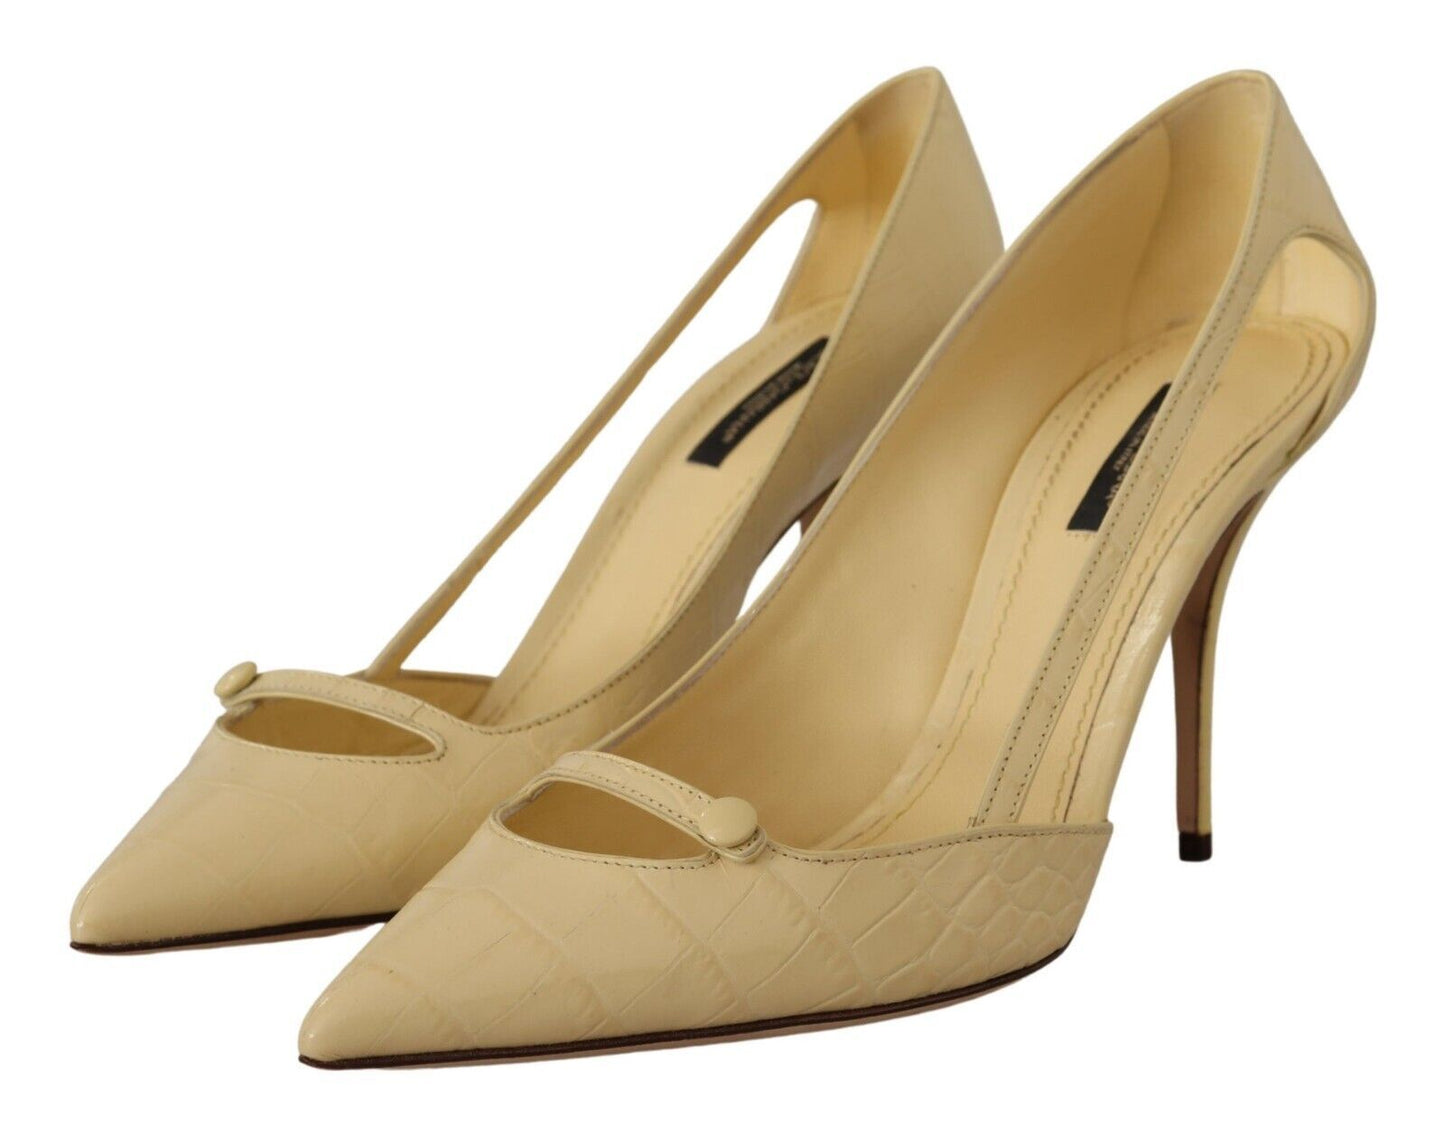 Dolce & Gabbana Chic Pointed Toe Leather Pumps in Sunshine Yellow